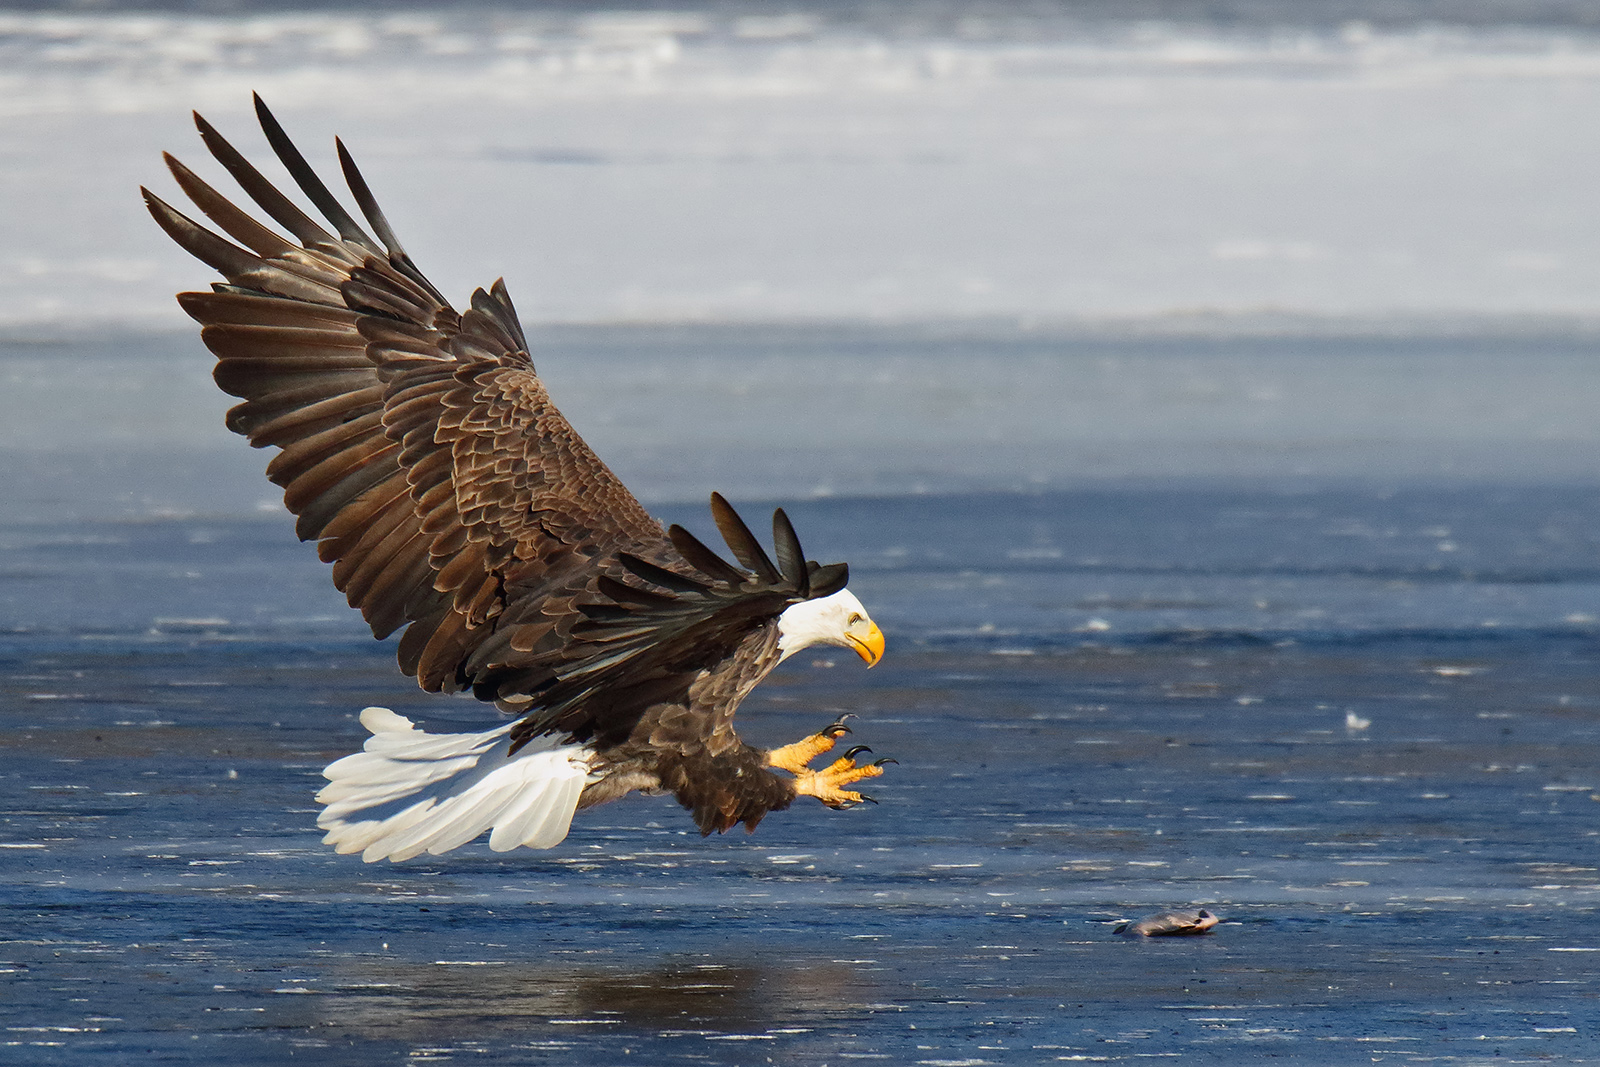 Bald eagle fishing on the Fox River in Illinois